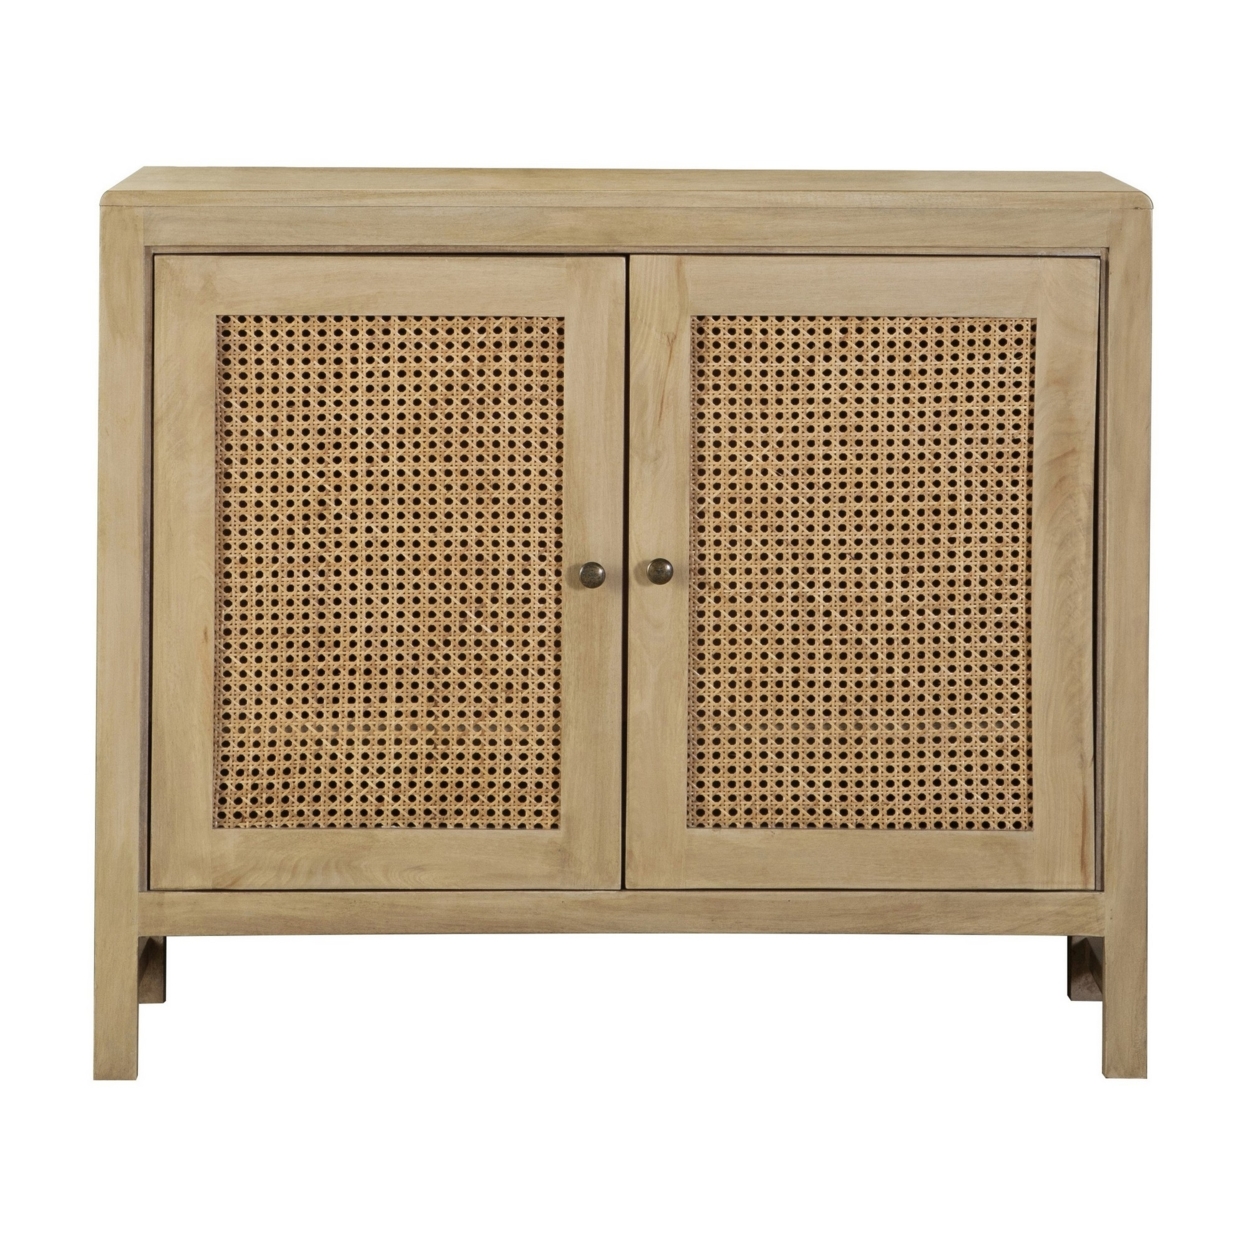 Enk 38 Inch 2 Door Accent Sideboard Console Cabinet, Natural Cane Brown- Saltoro Sherpi